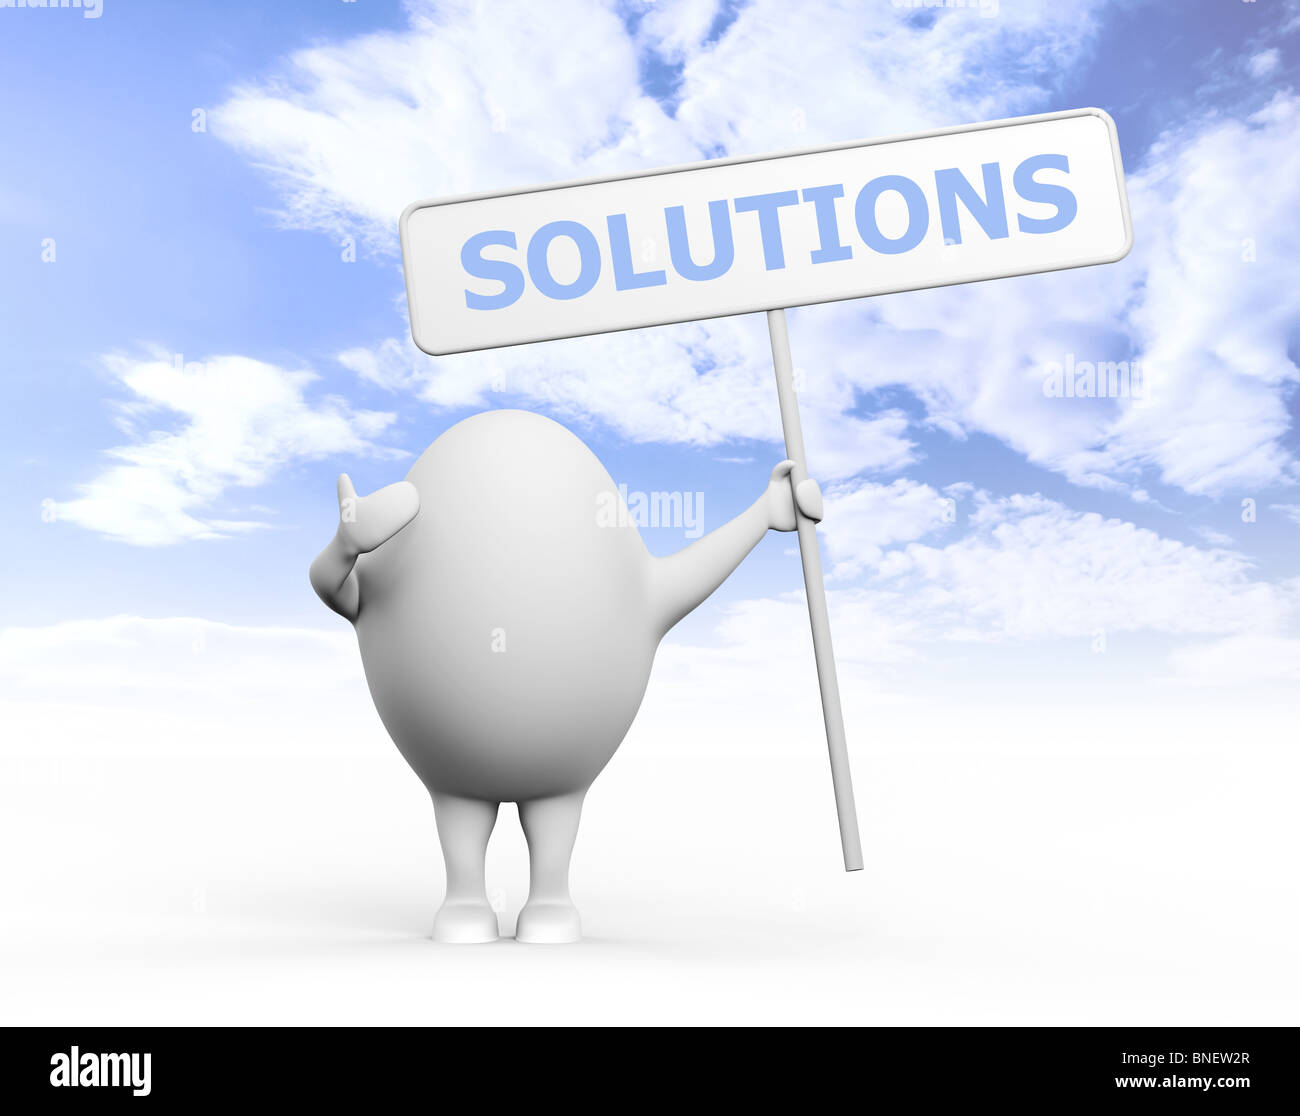 3D illustration of a cartoon egghead character holding a sign with Solution written on it under blue sky Stock Photo